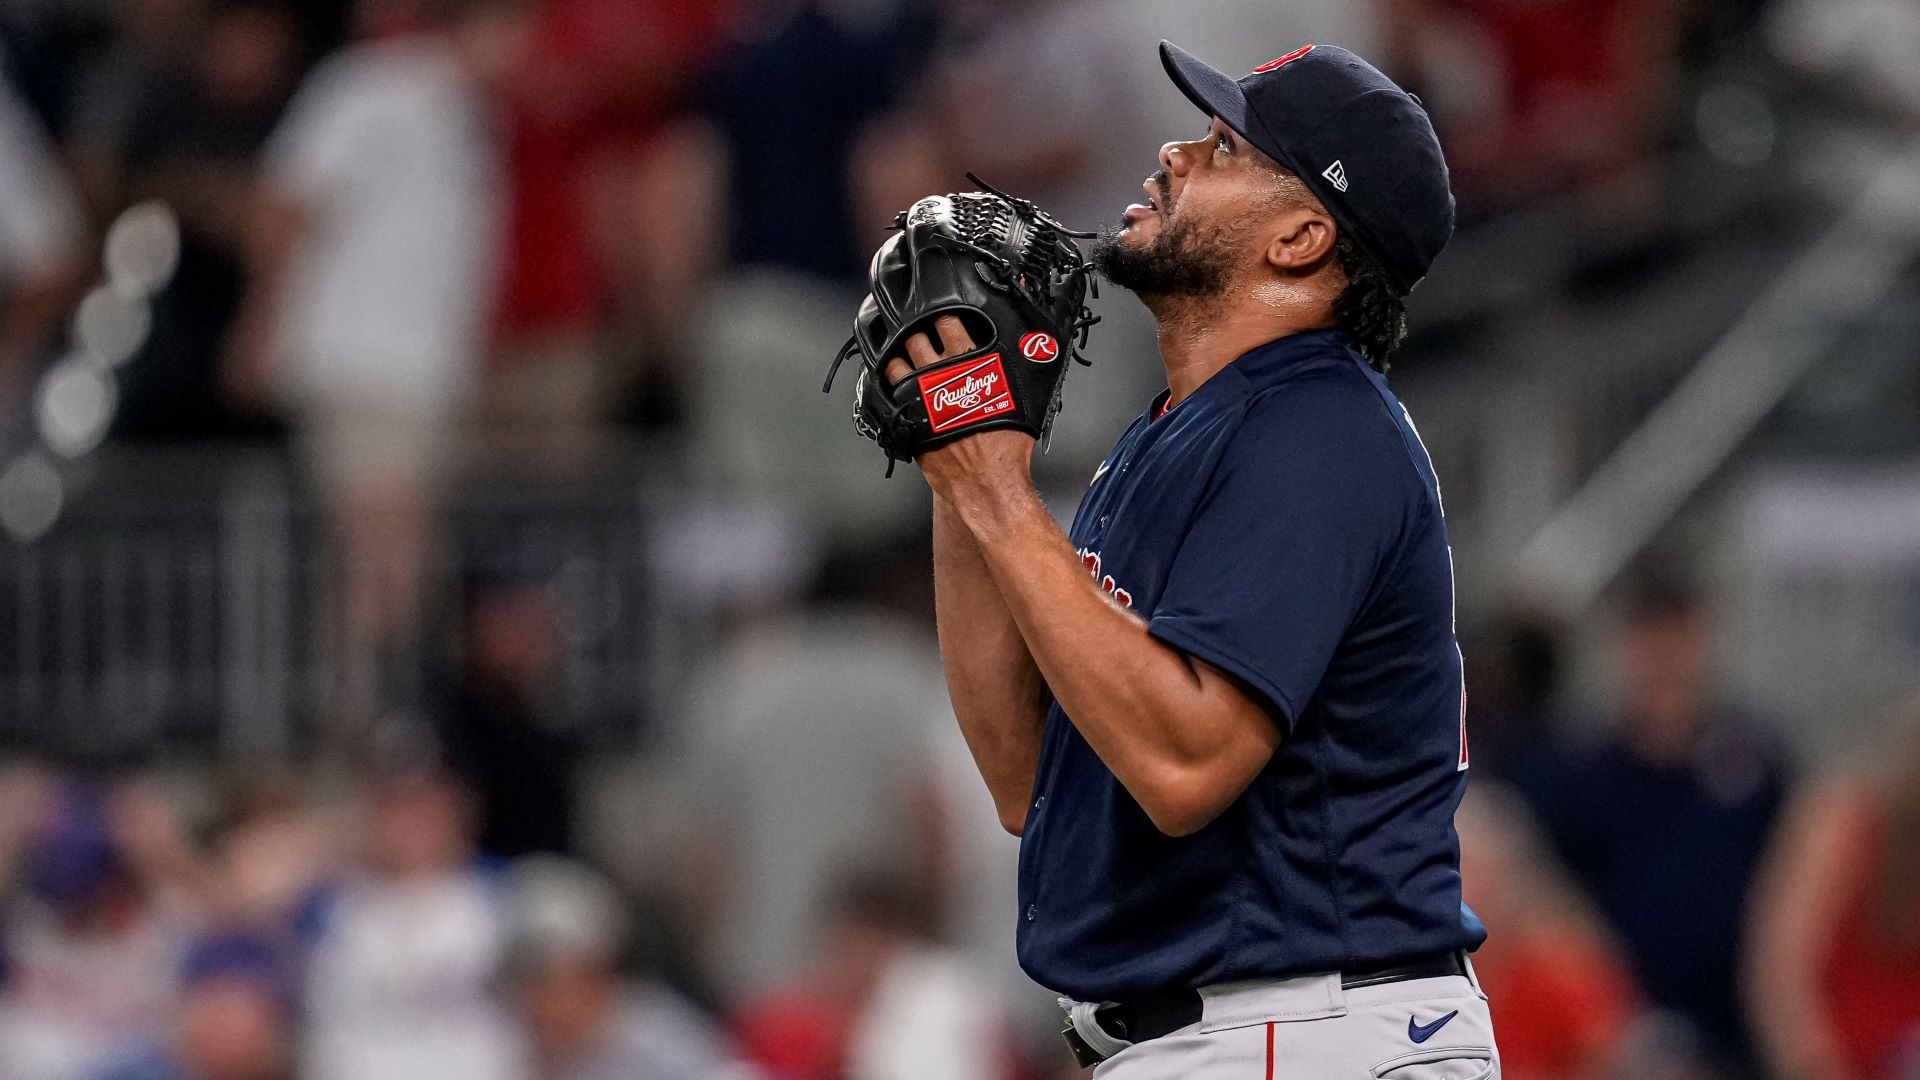 Kenley Jansen Says He Had Blast With Braves, But Open To Dodgers